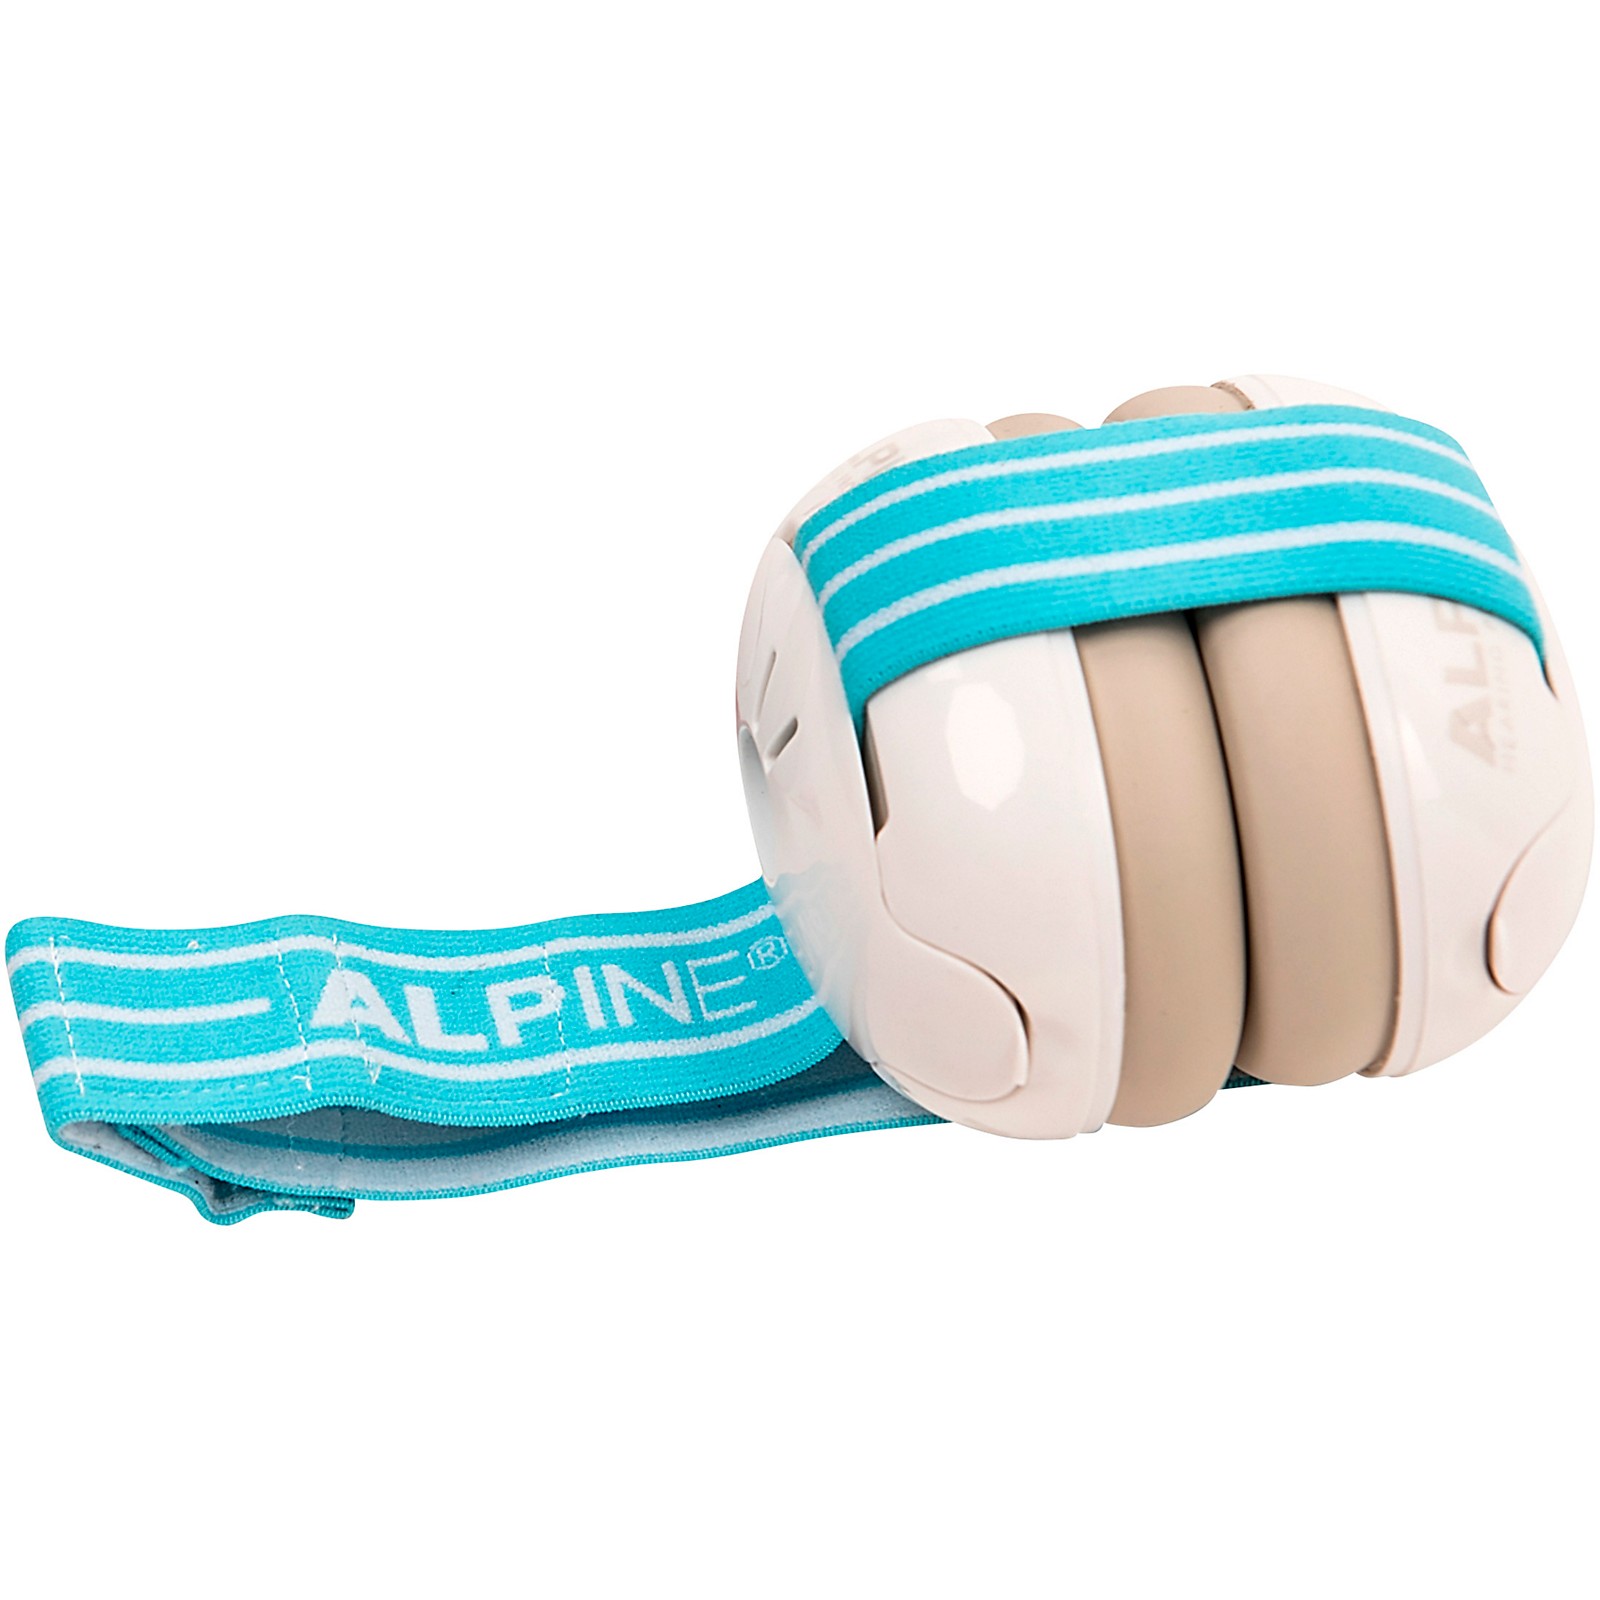 Alpine Hearing Protection Muffy Baby Blue Protective Headphones ...